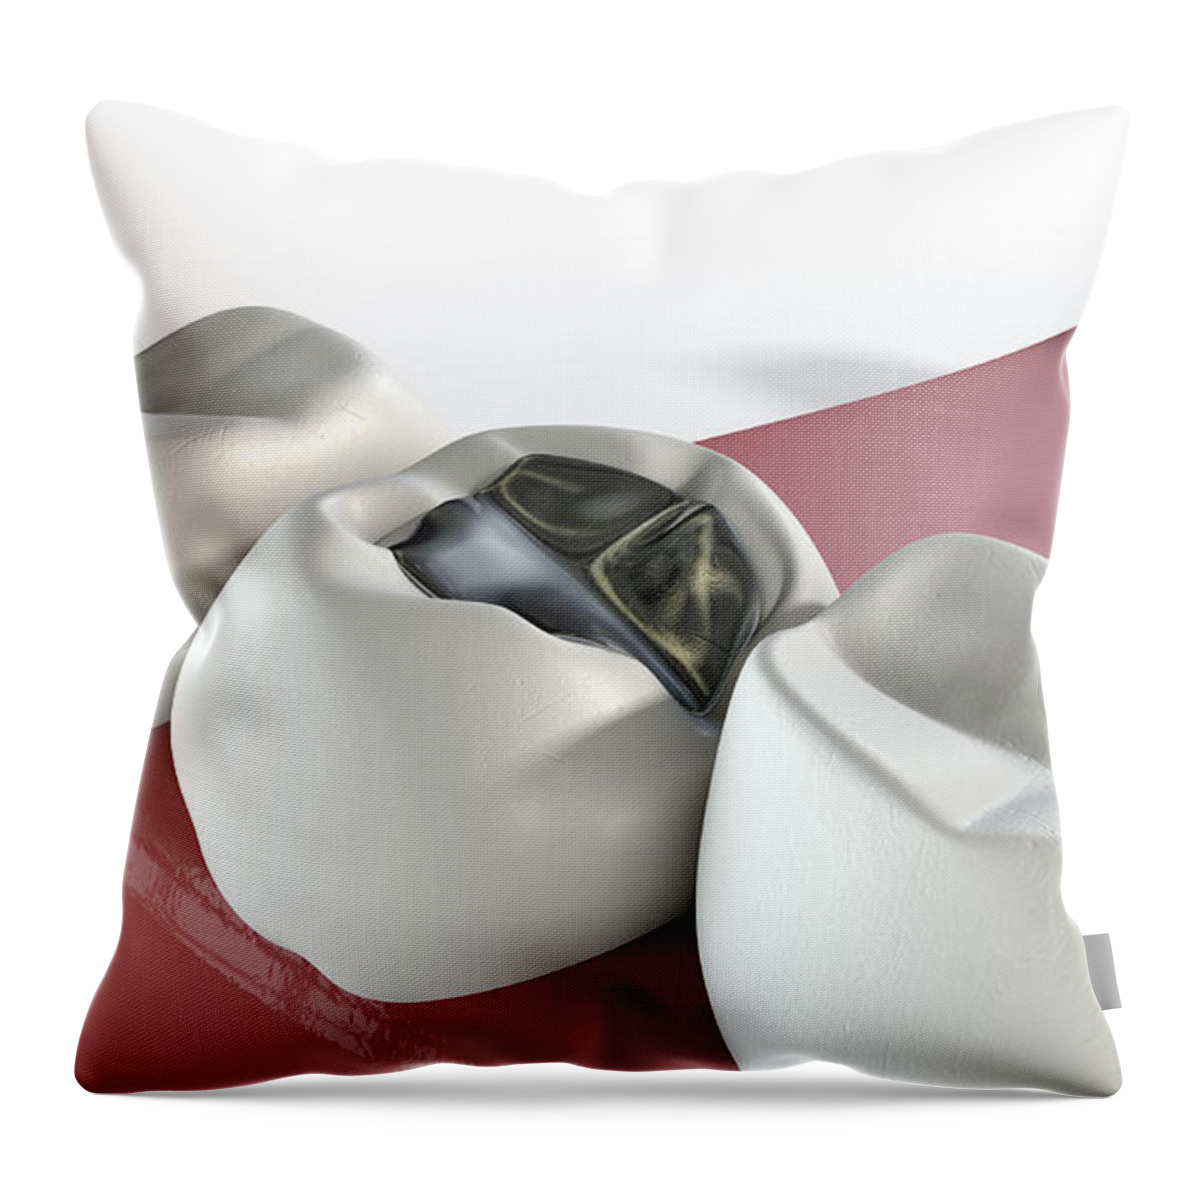 Teeth Throw Pillow featuring the digital art Teeth With Lead Filling #1 by Allan Swart